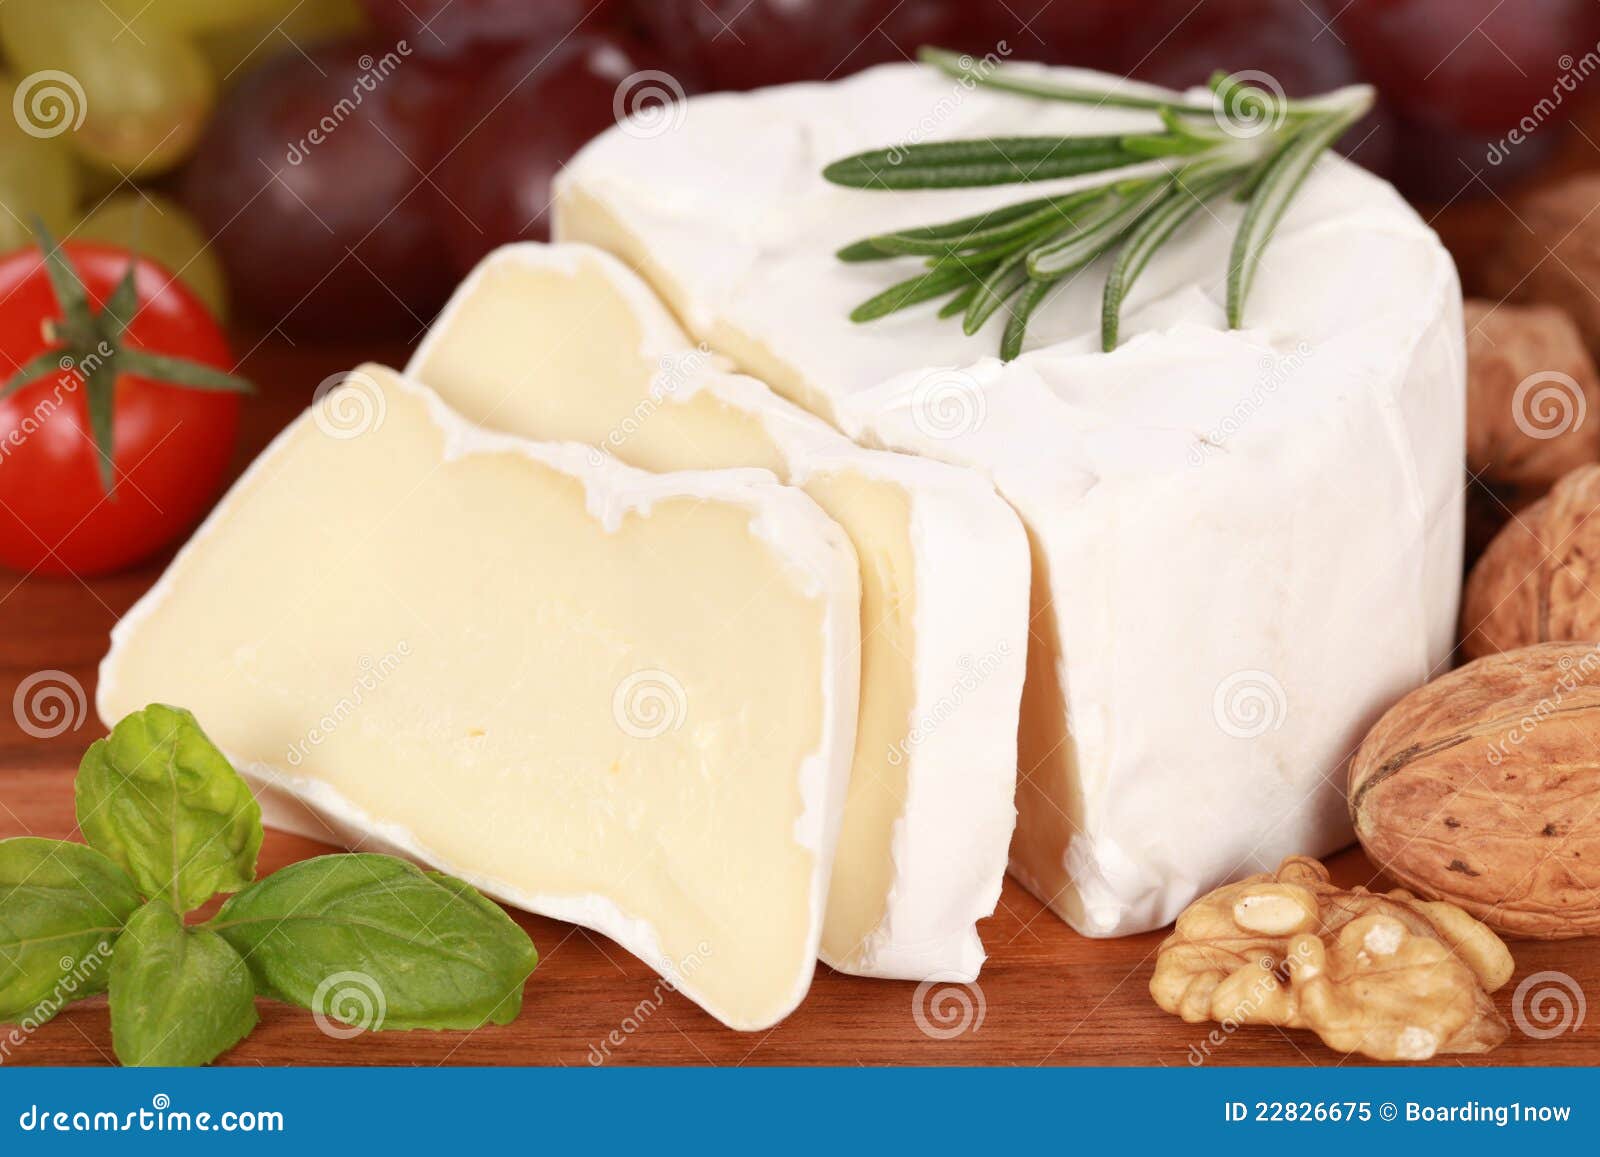 still life with camembert cheese cut on slices